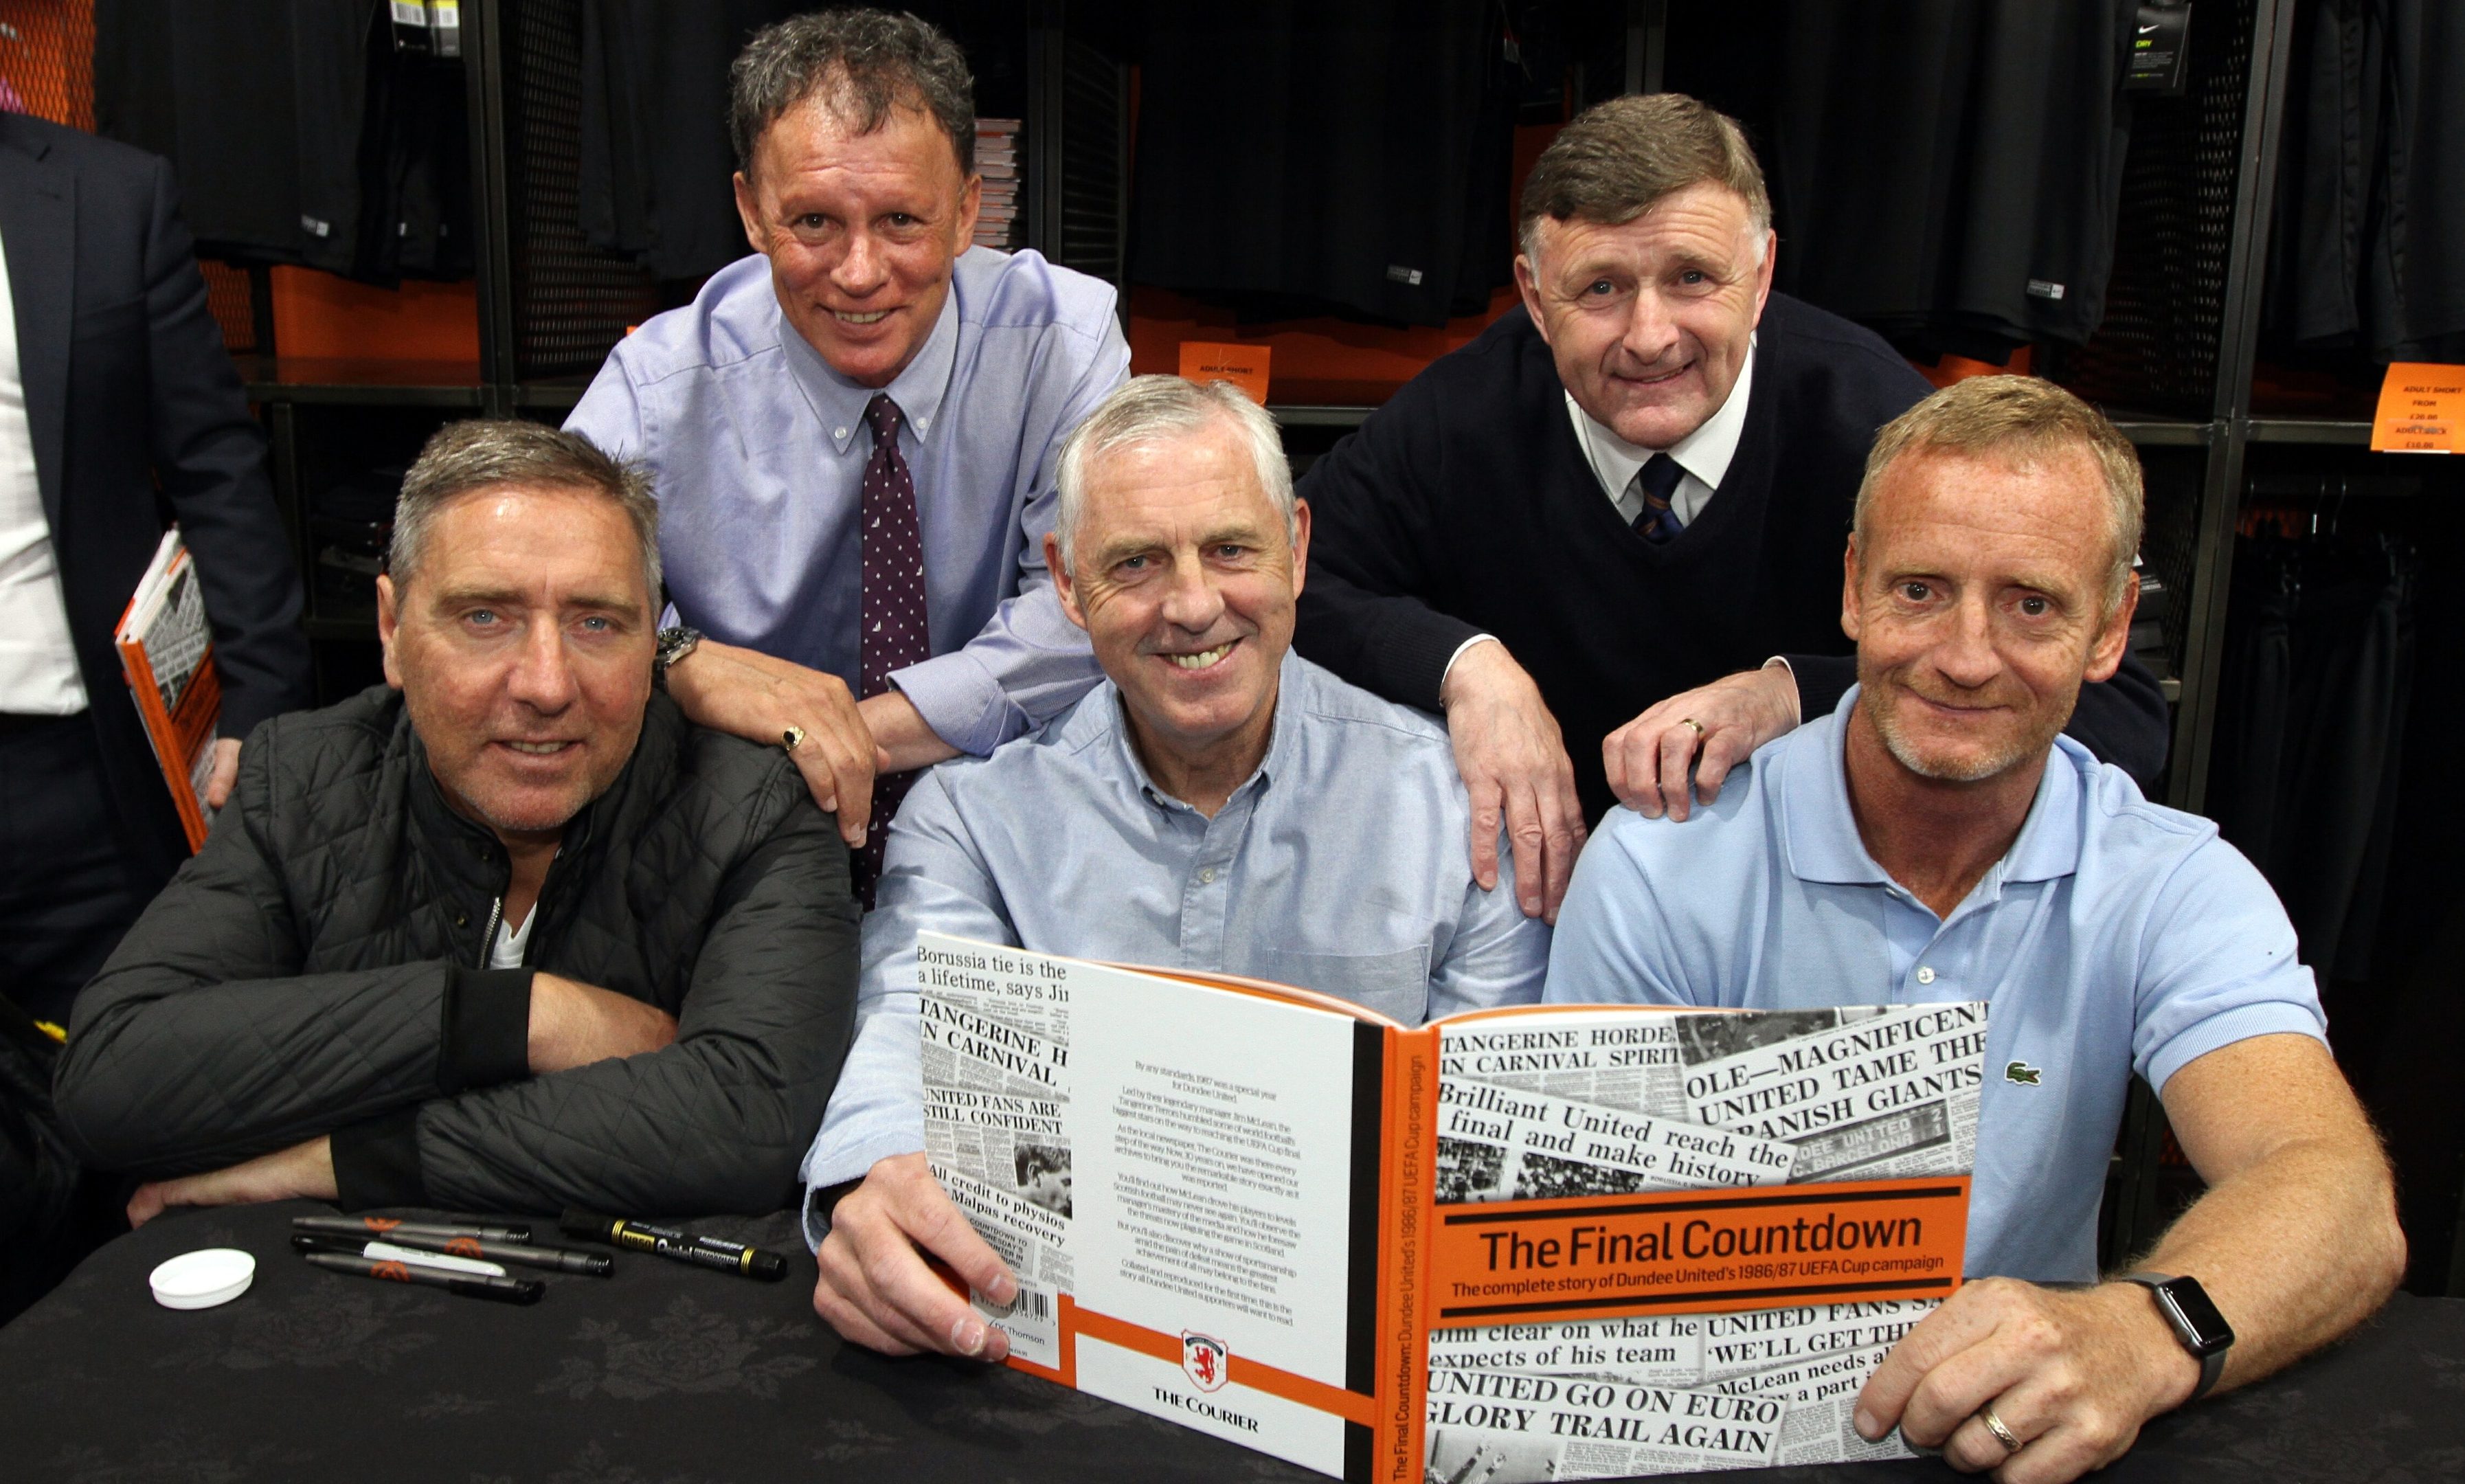 From left: Jim McInally, John Holt, Dave Narey, Paul Hegarty and Dave Bowman at the launch.